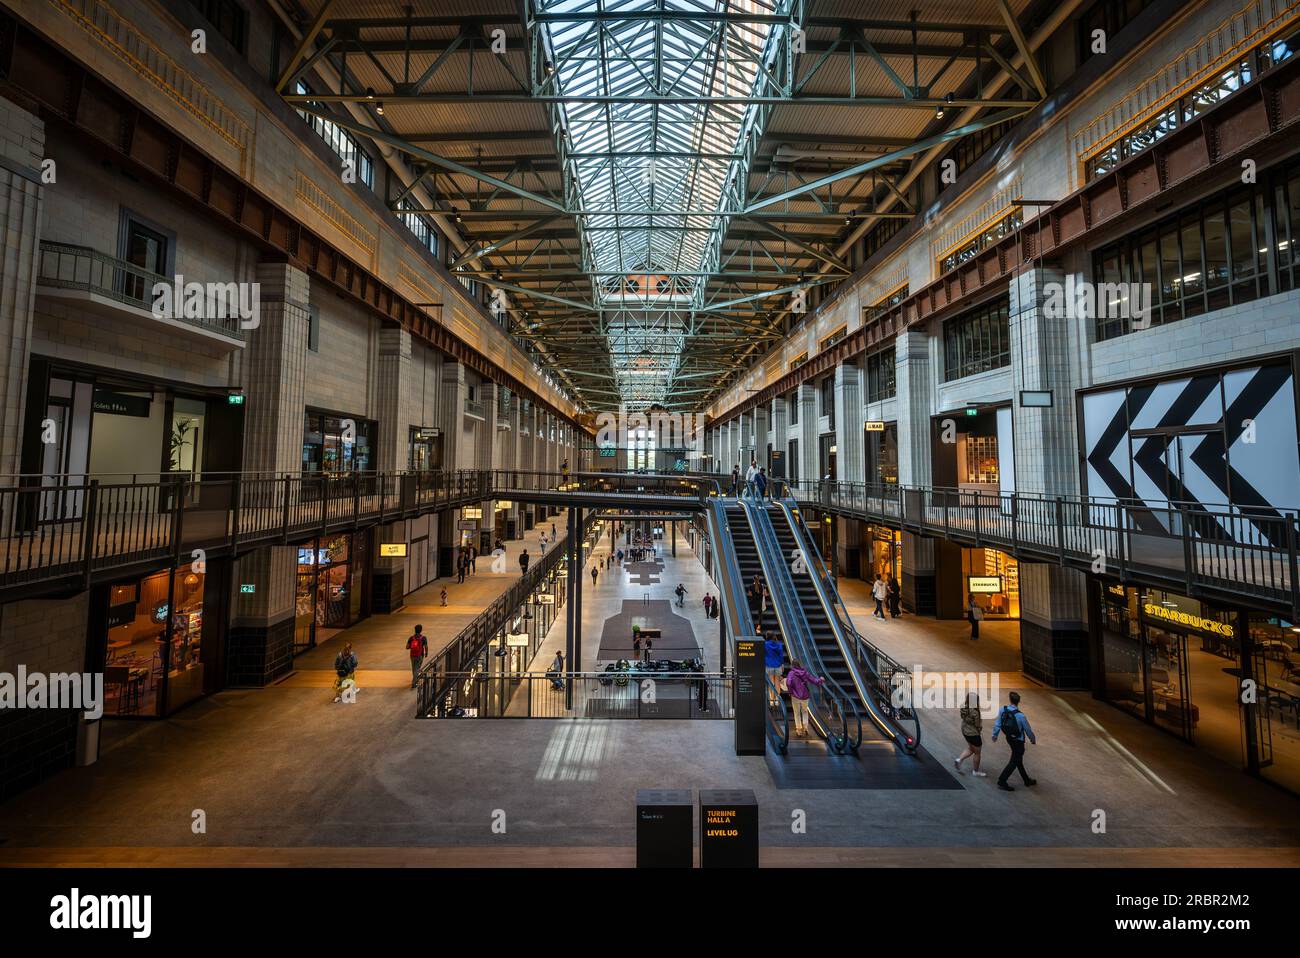 Battersea, London, UK: Battersea Power Station now redeveloped as a shopping and leisure destination. Interior of Turbine Hall A with escalator Stock Photo